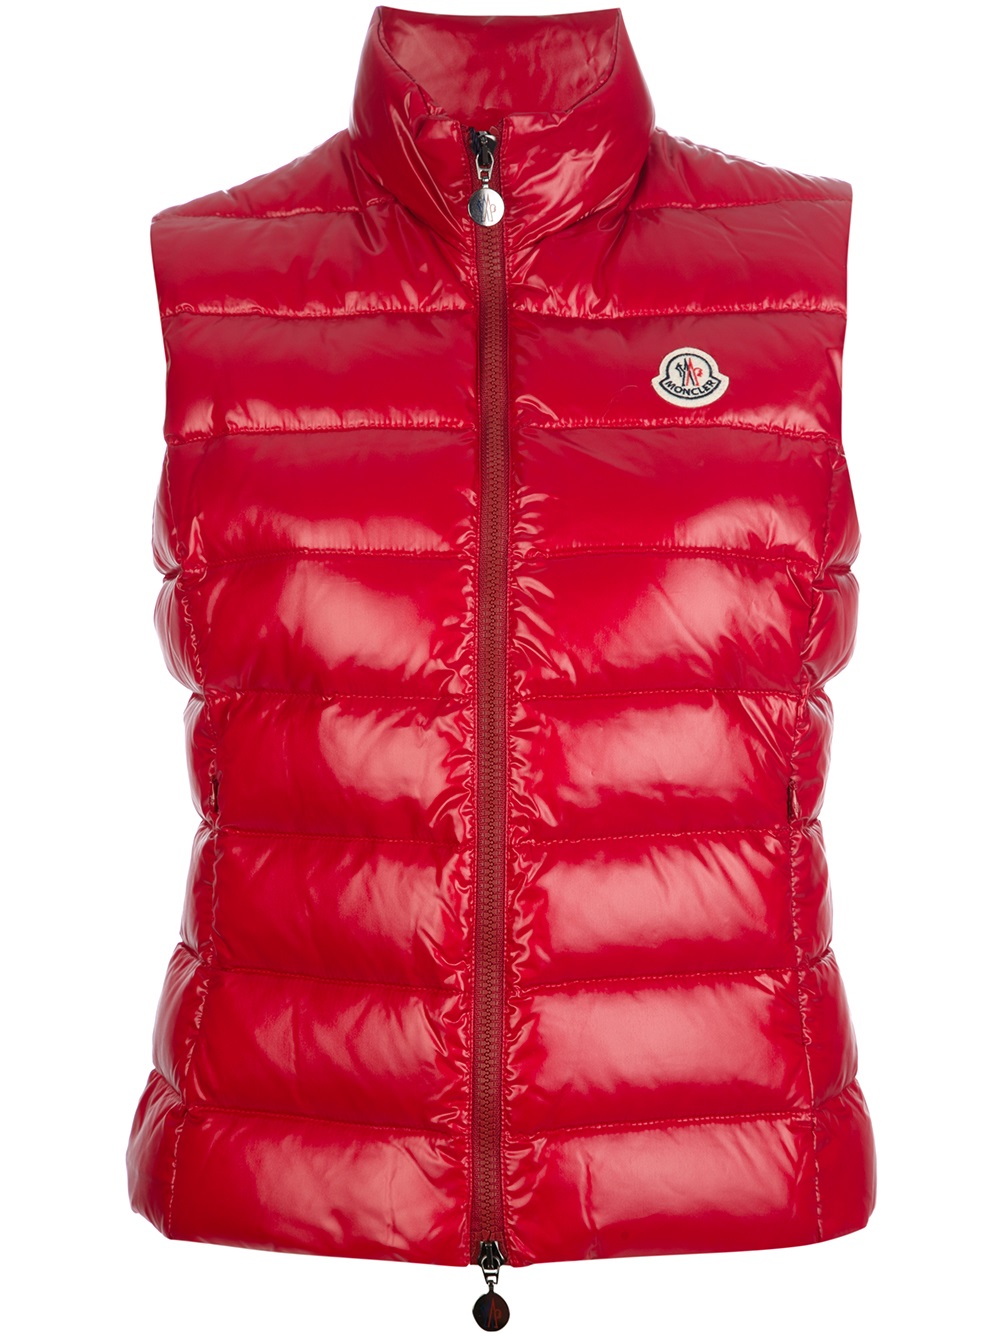 Lyst - Moncler 'Ghany' Gilet Jacket in Red